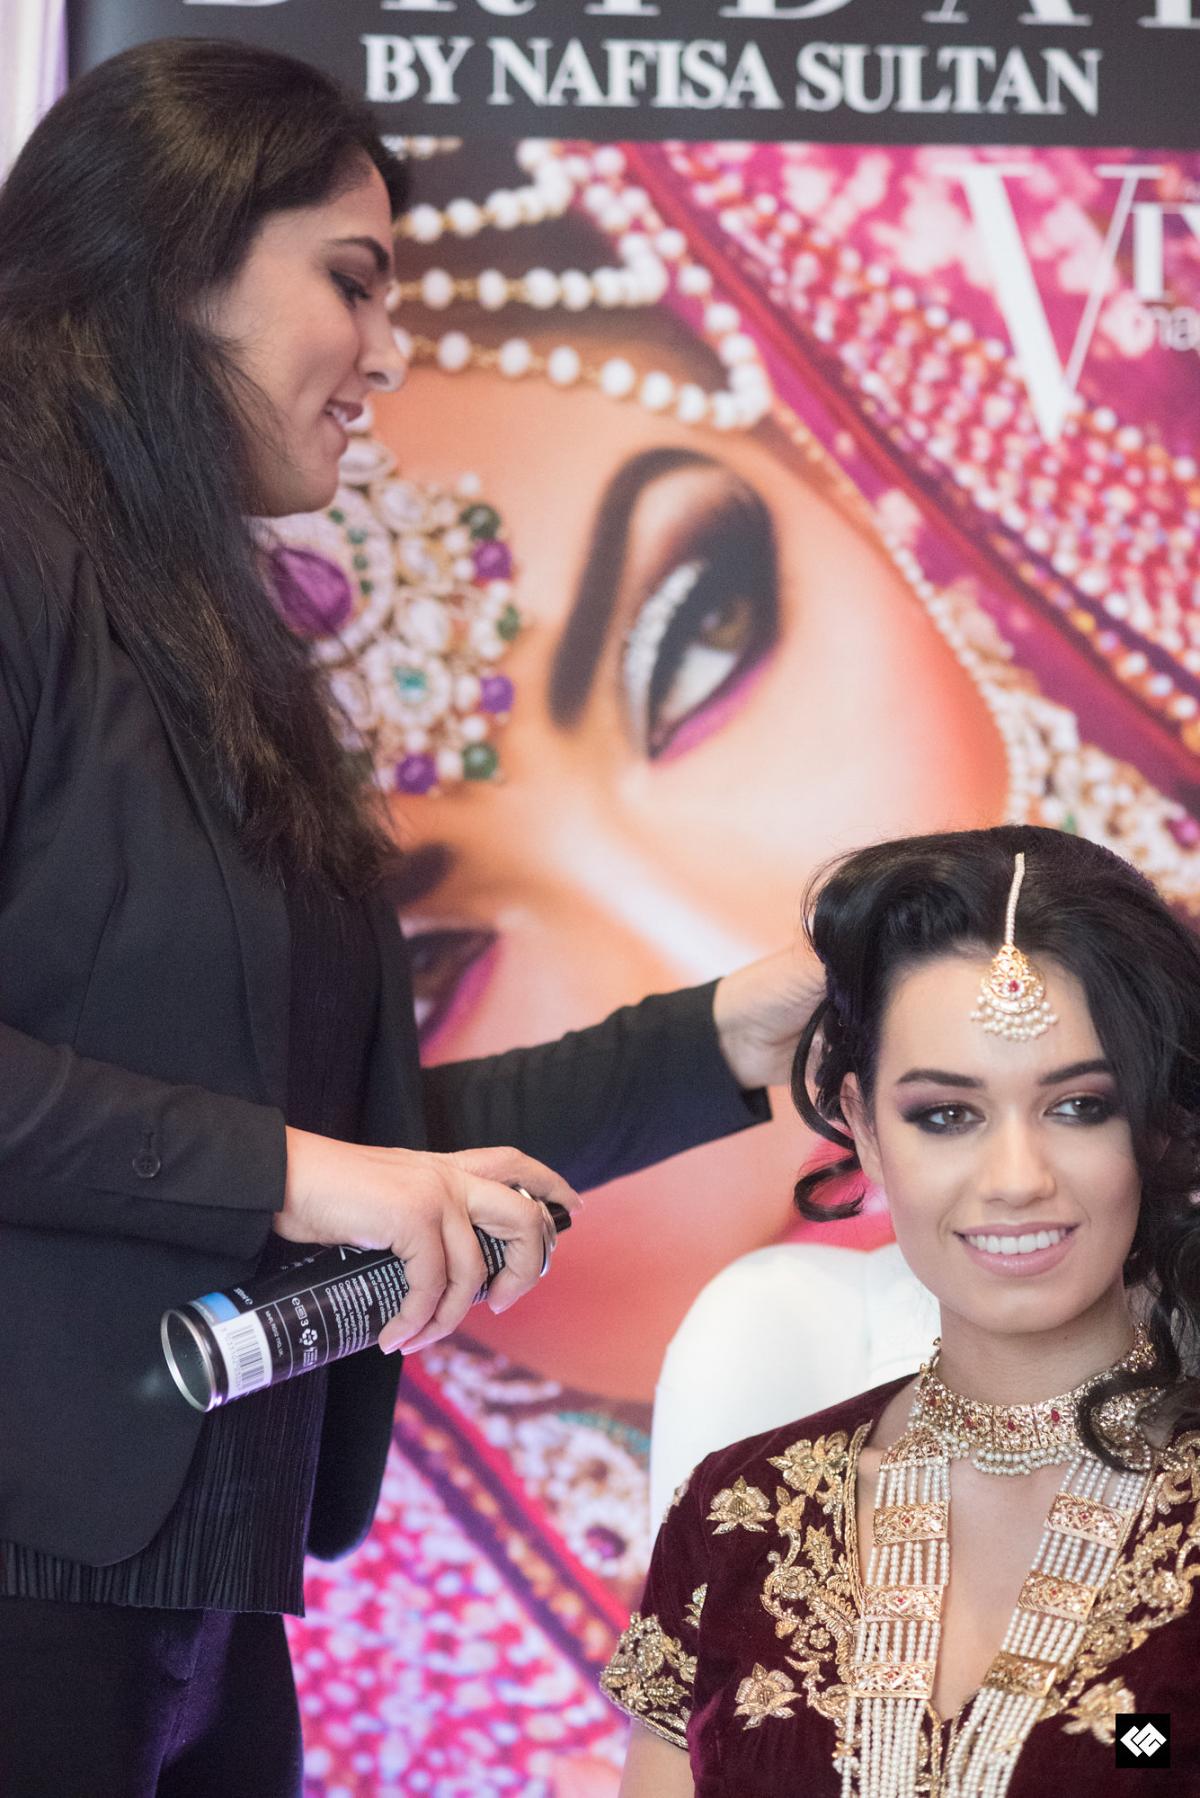 The Asian Wedding Experience 2018 held on Sunday February 18 at the Manchester Hilton Deansgate. All imaqes courtesy: Zain Ali Photography